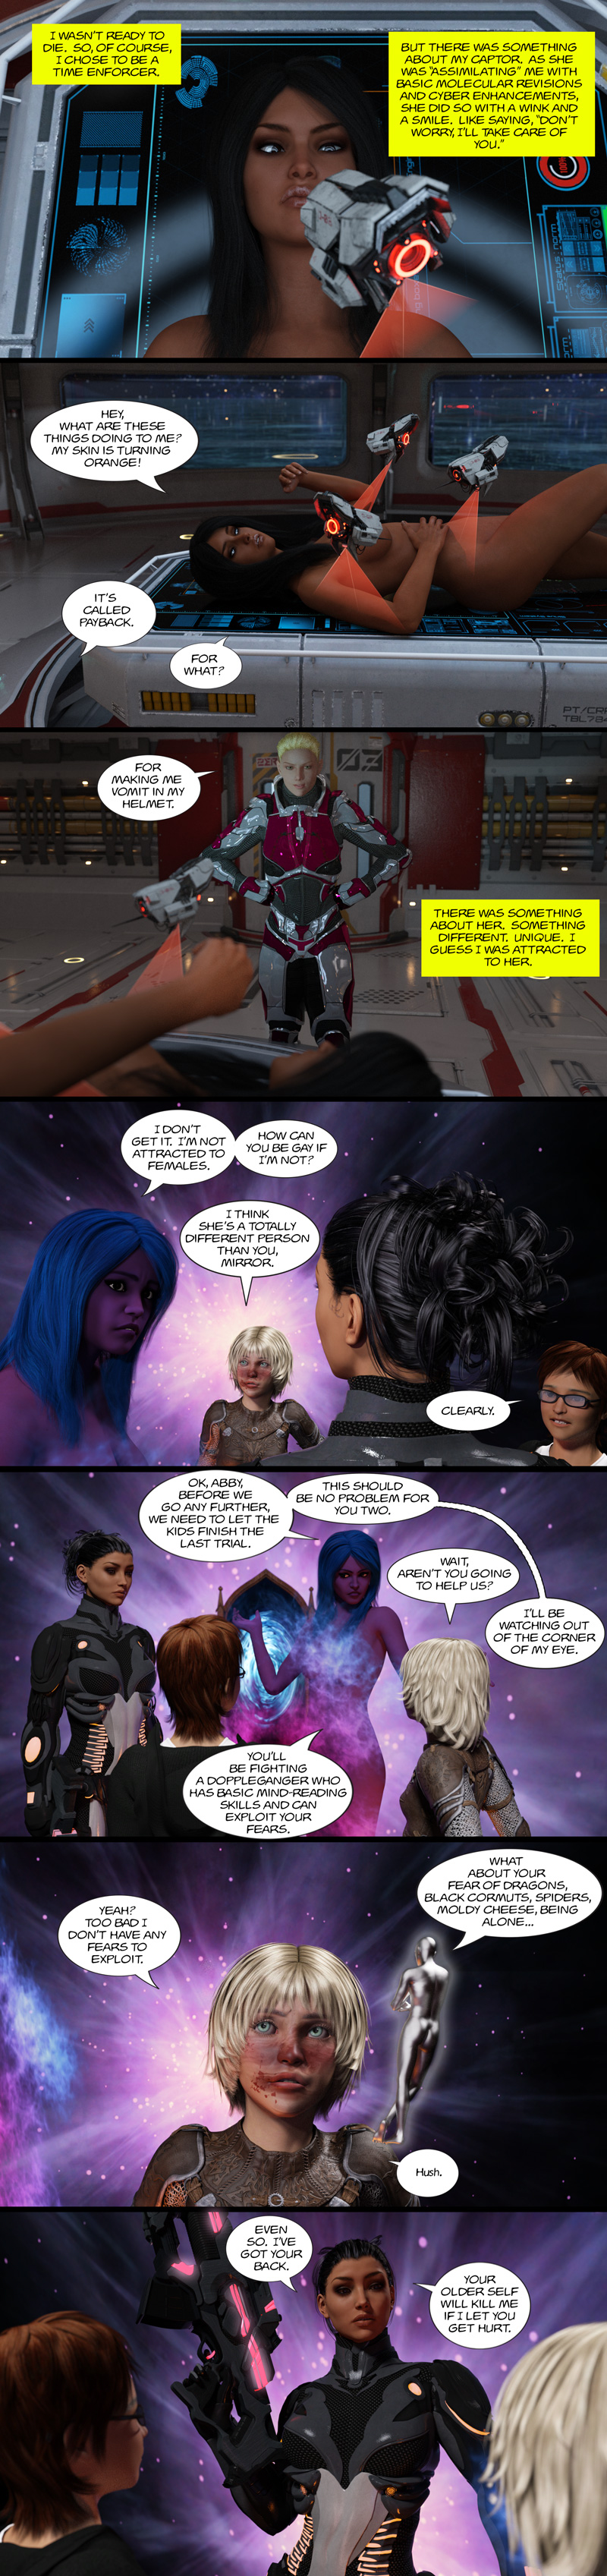 Chapter 13, page 17